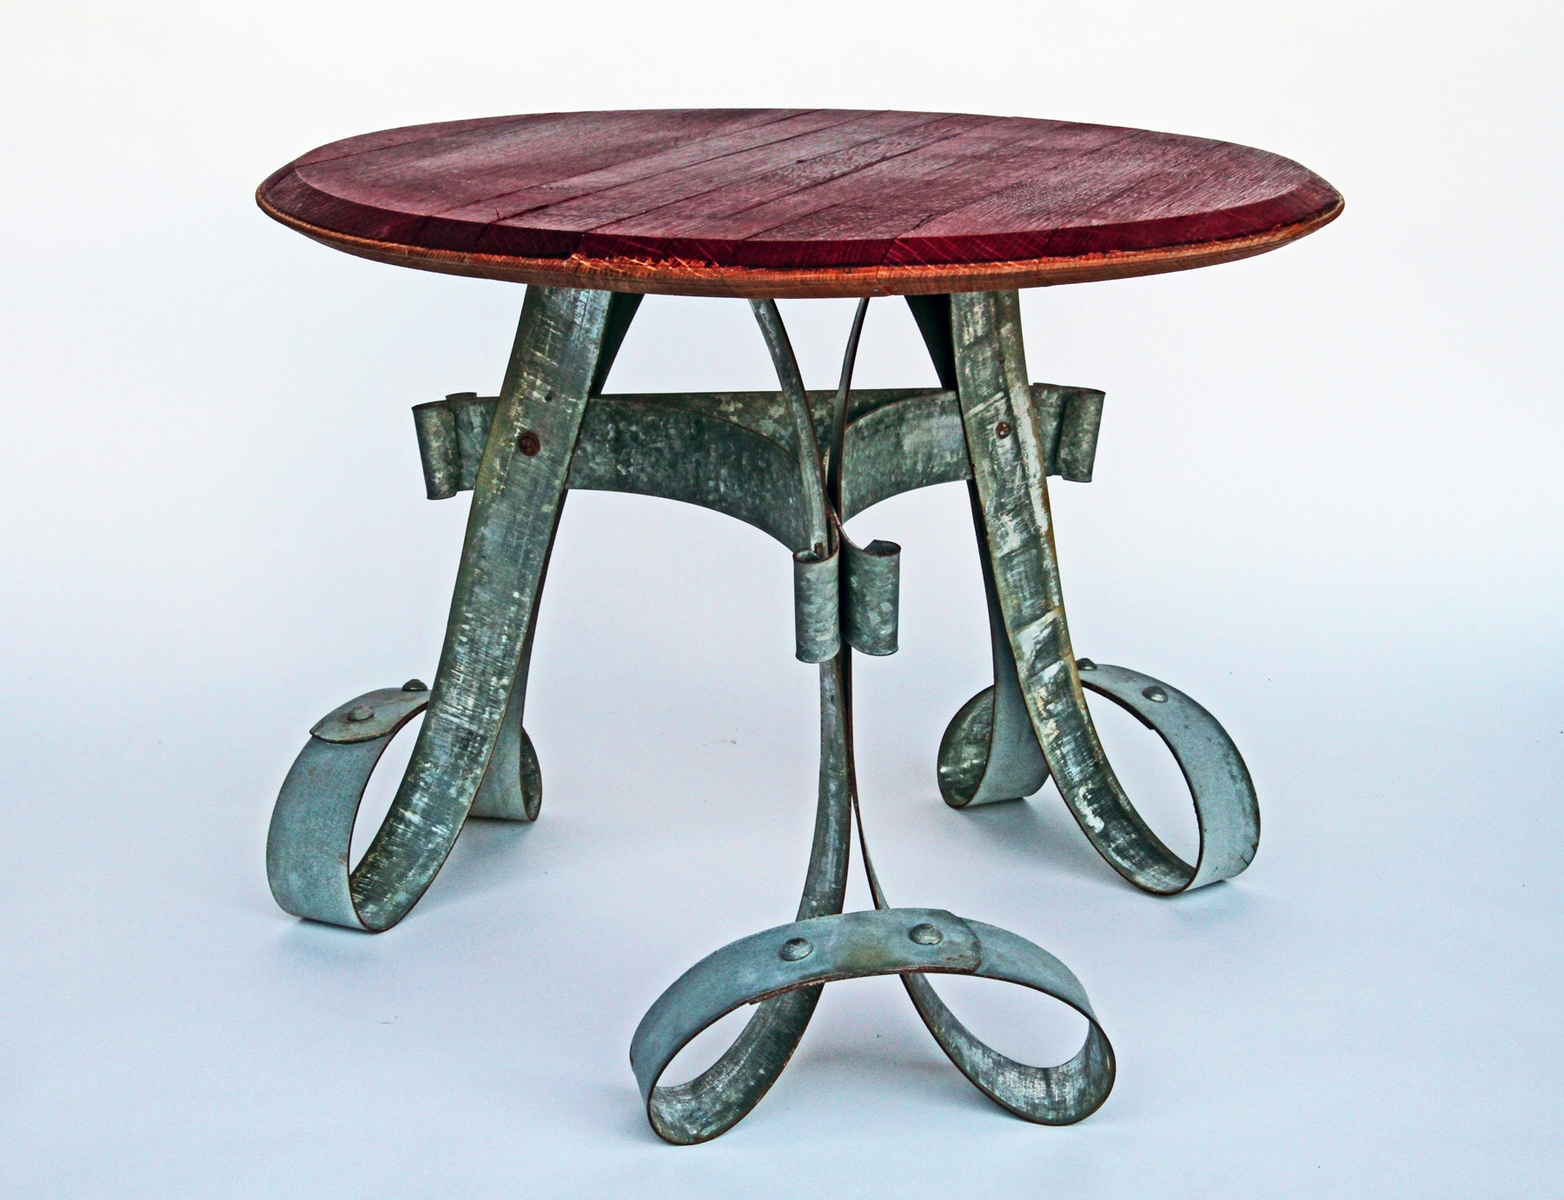 Barrel Banding End Table by Whit McLeod Furniture at CustomMade.com